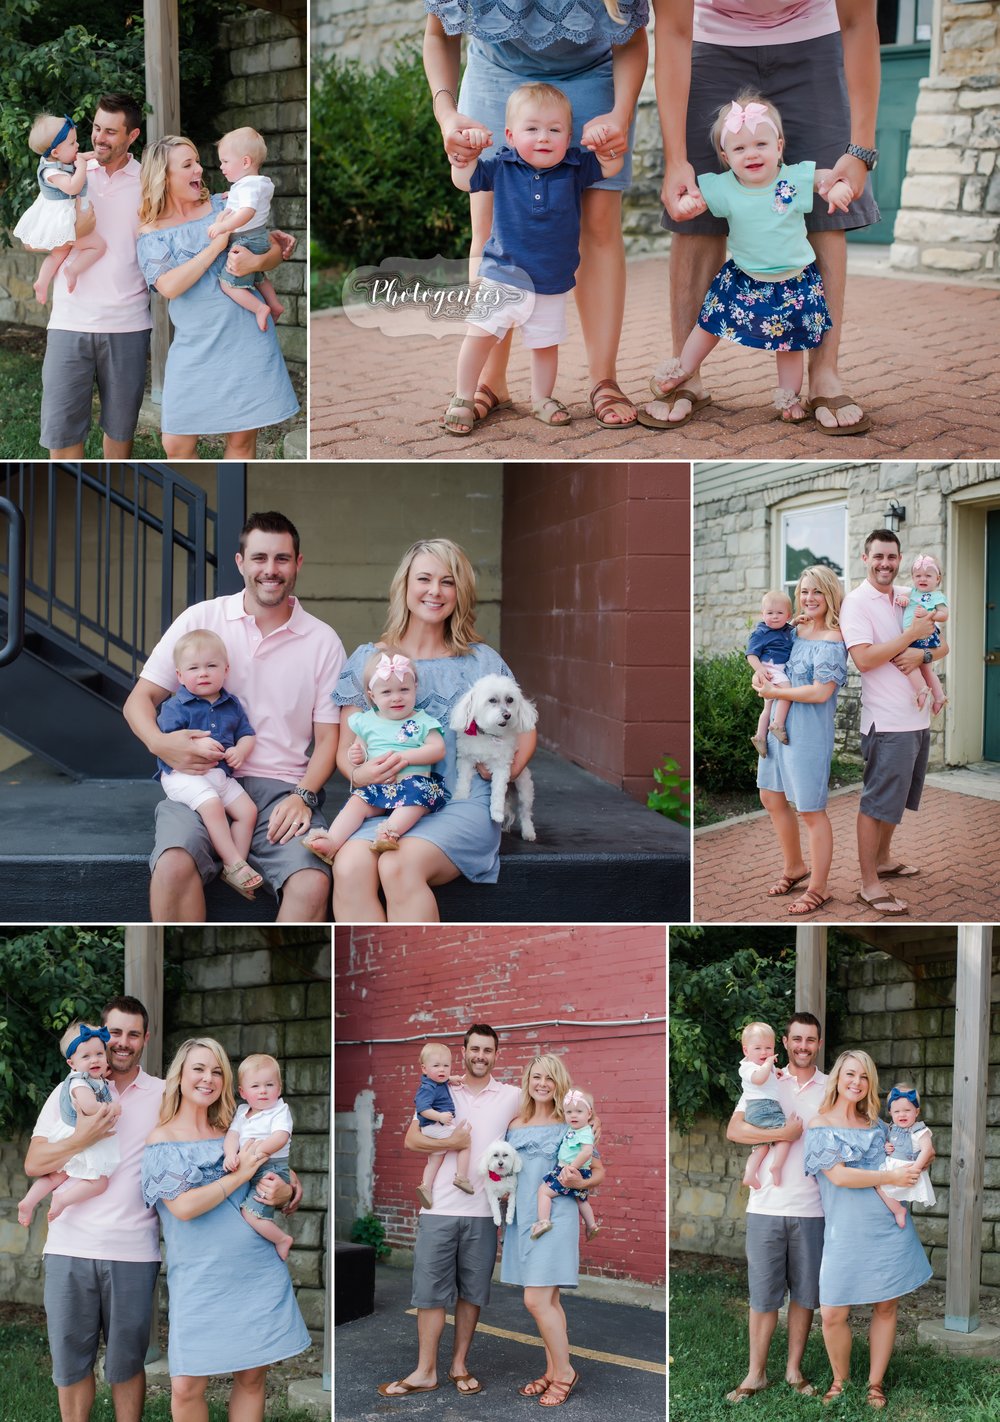  boy_girl_twins_photography_12_months_1_year_old_poses_ideas_props_family_of_four 1 